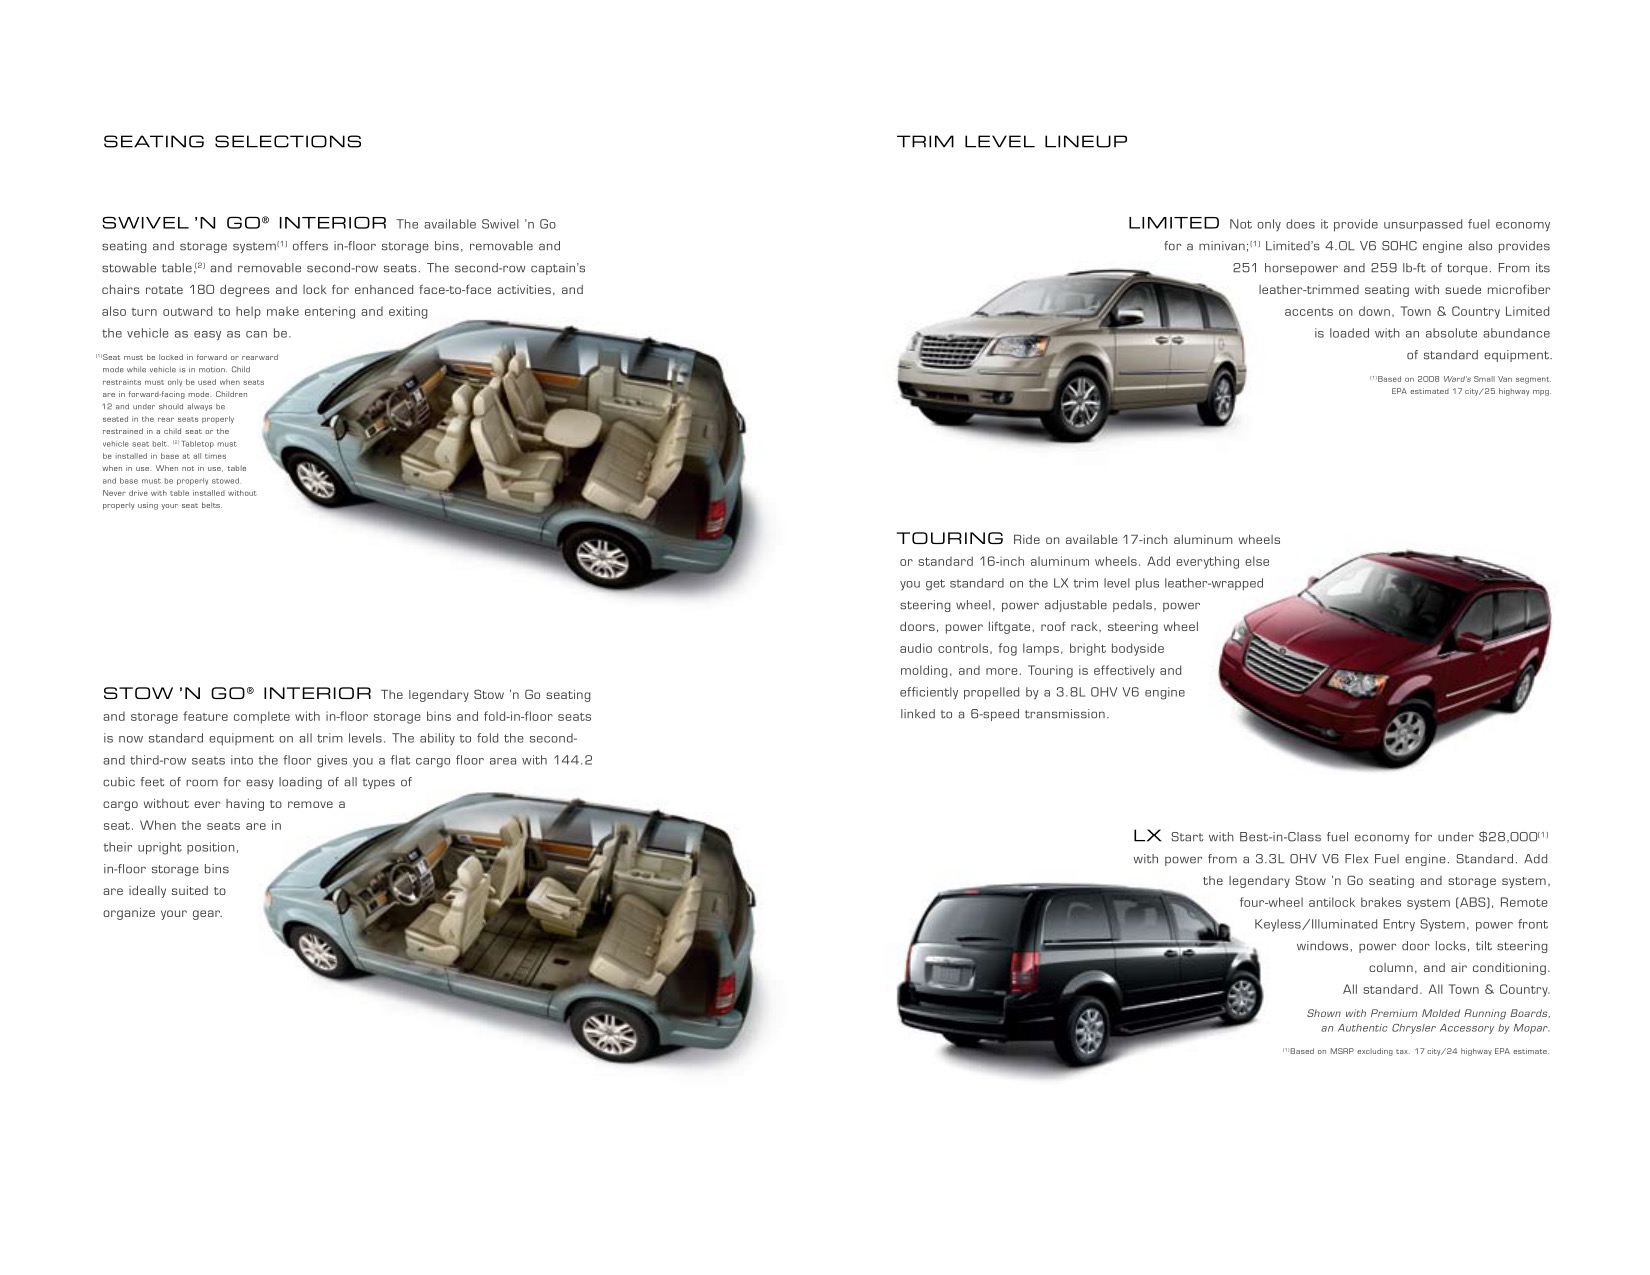 2009 Chrysler Town & Country Brochure Page 3